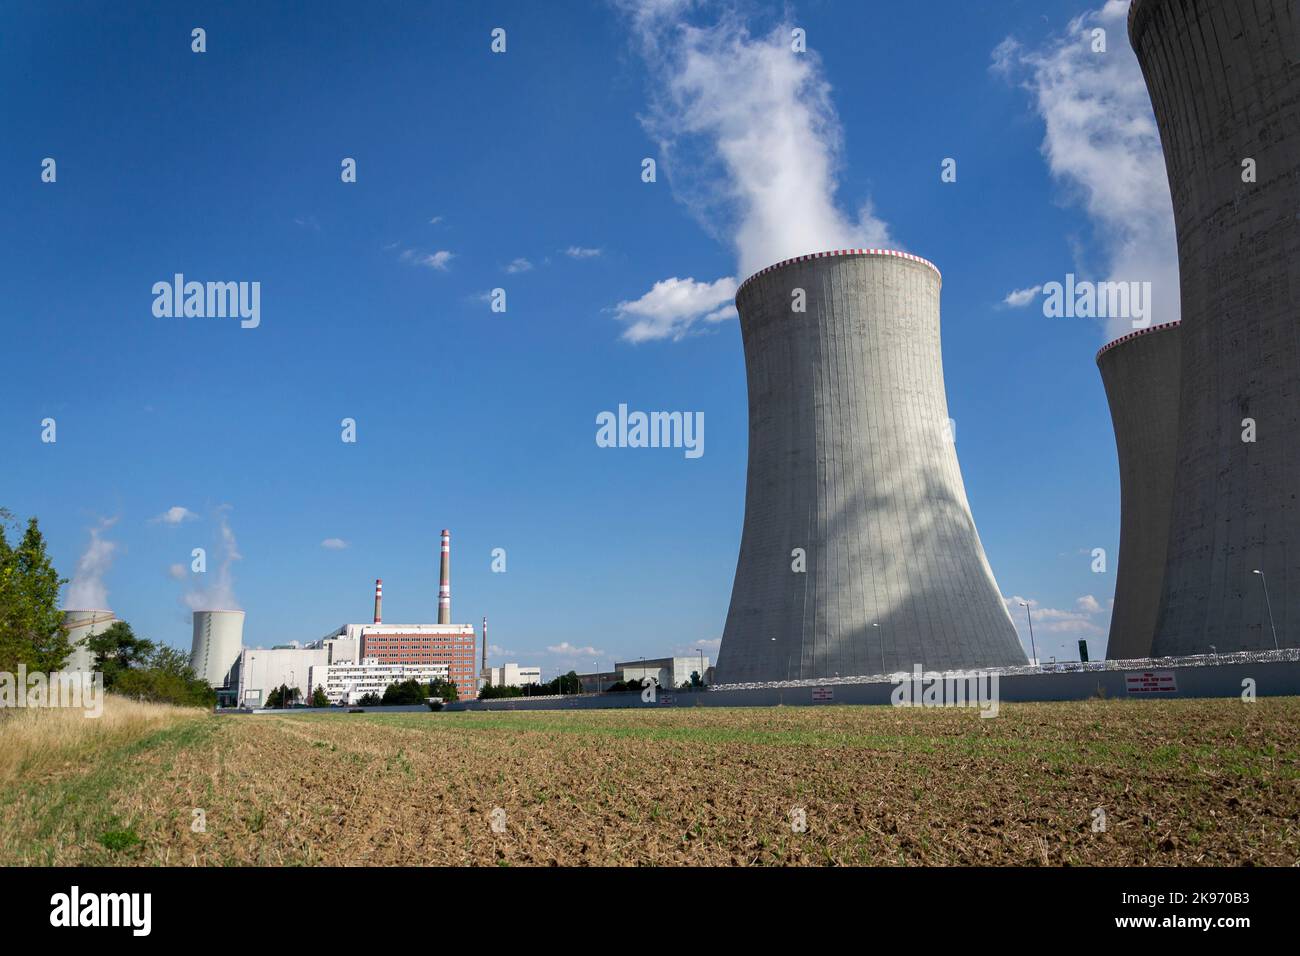 Cooling towers at nuclear power plant, energy self-sufficiency, greenhouse emission reduction Stock Photo